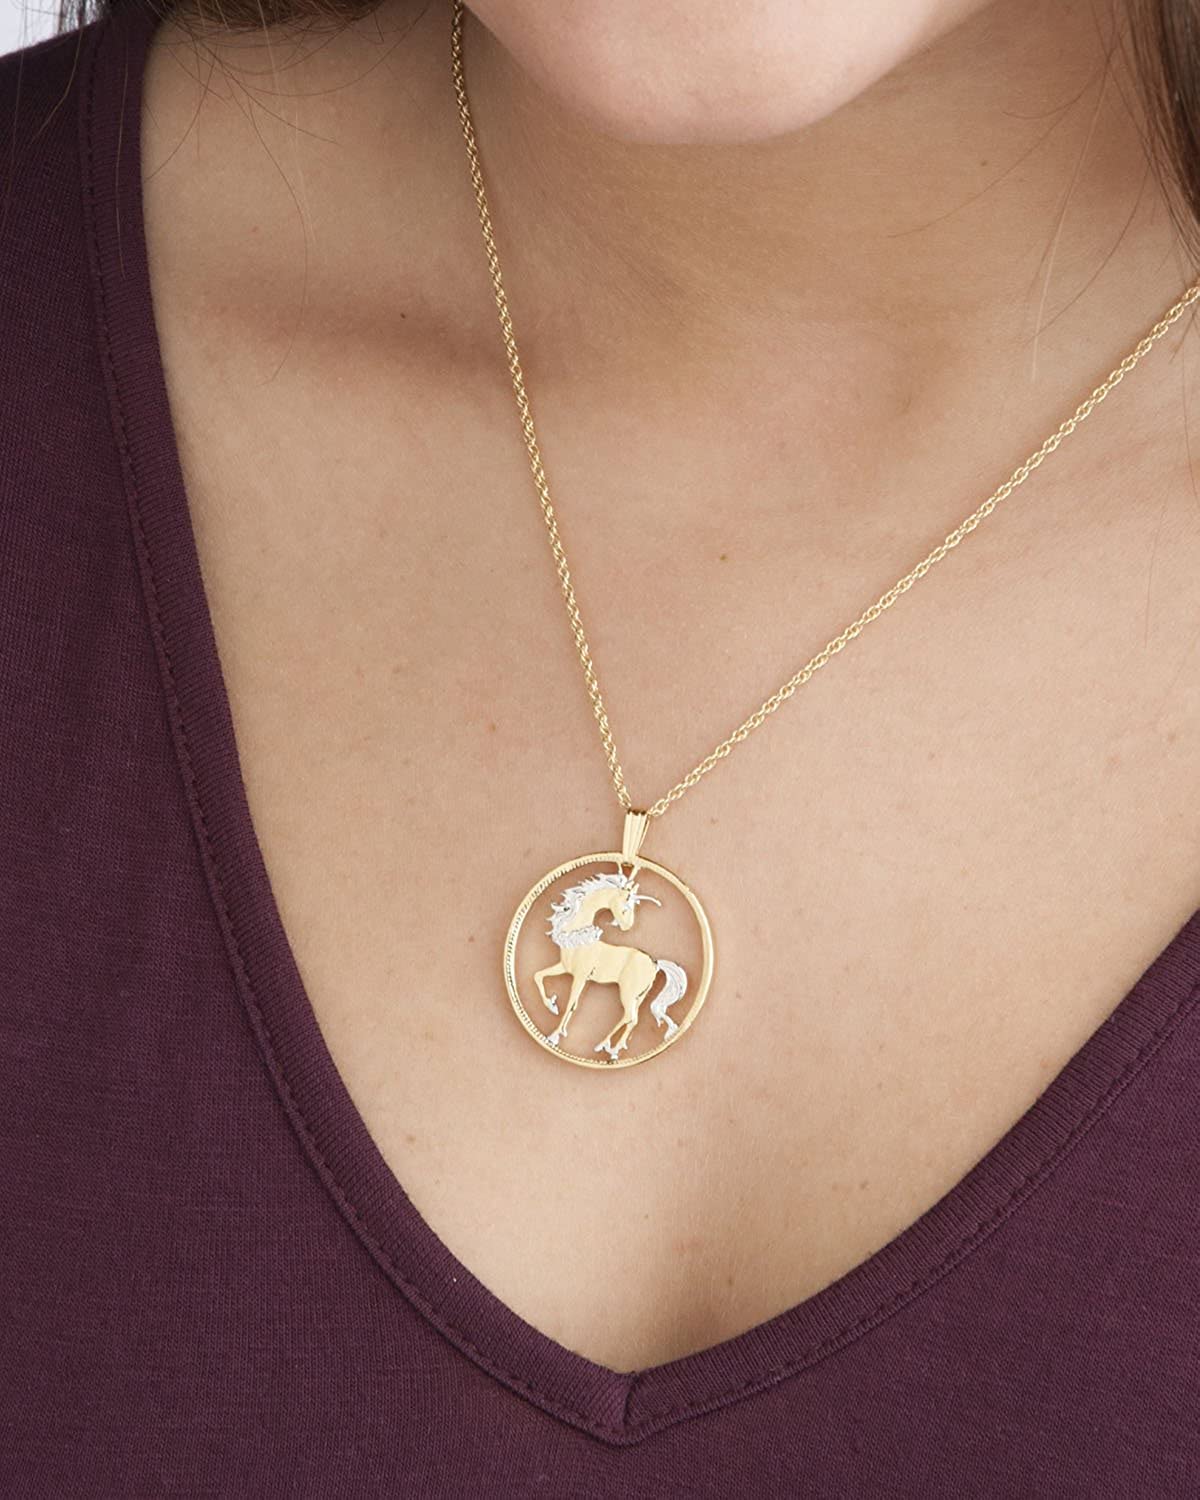 Unicorn Pendant and Necklace, Chinese Coin Hand Cut, 14 Karat Gold and Rhodium Plated, 1